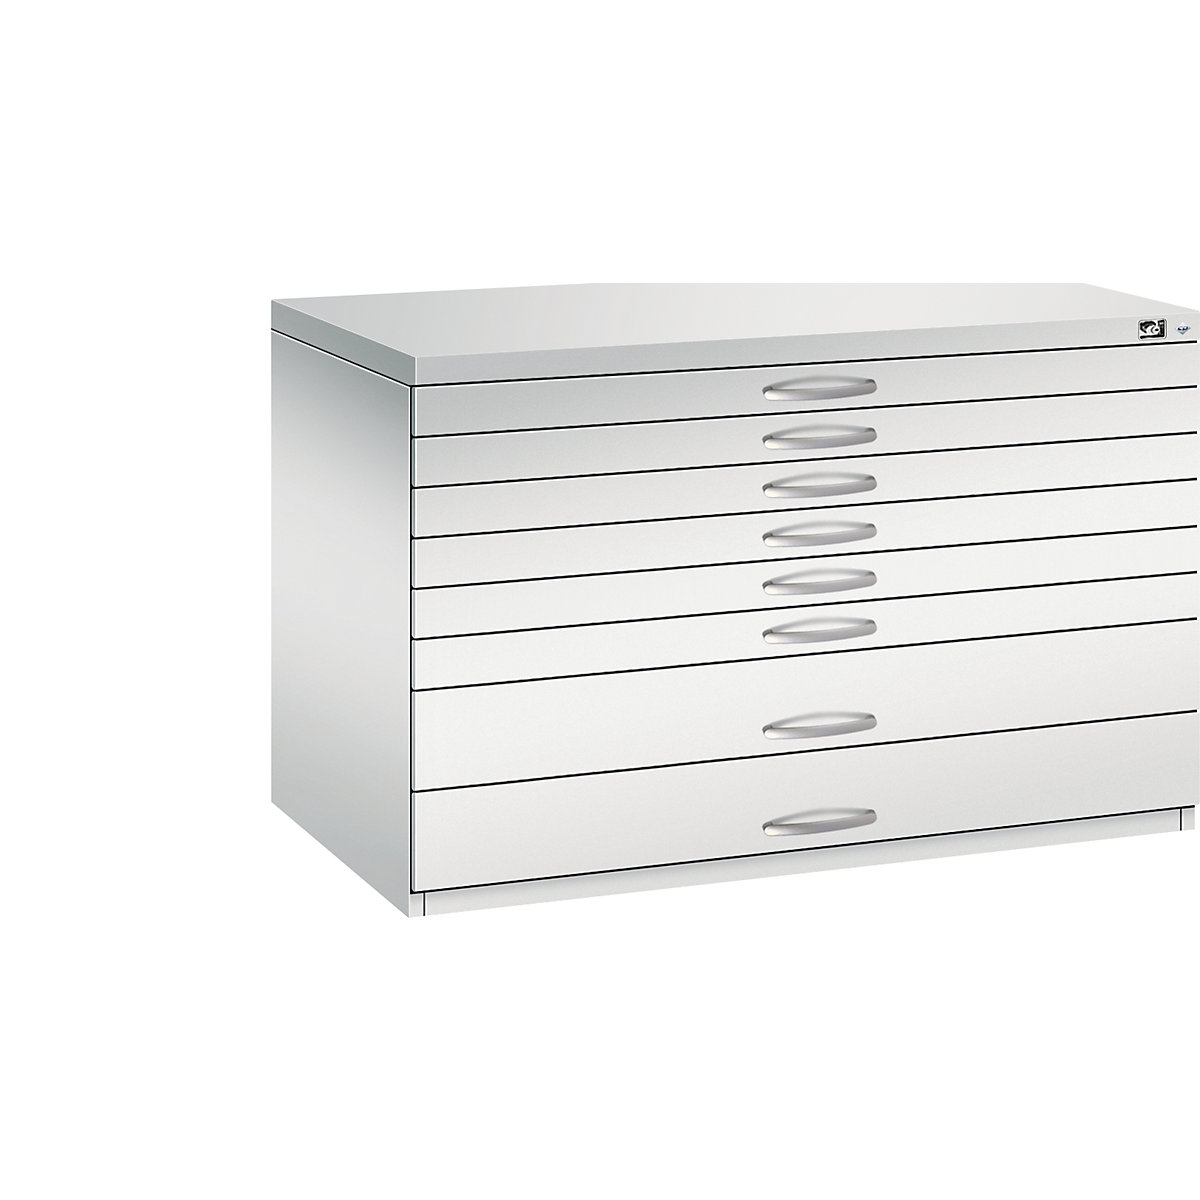 Drawing cabinet – C+P, A1, 8 drawers, height 760 mm, light grey-20